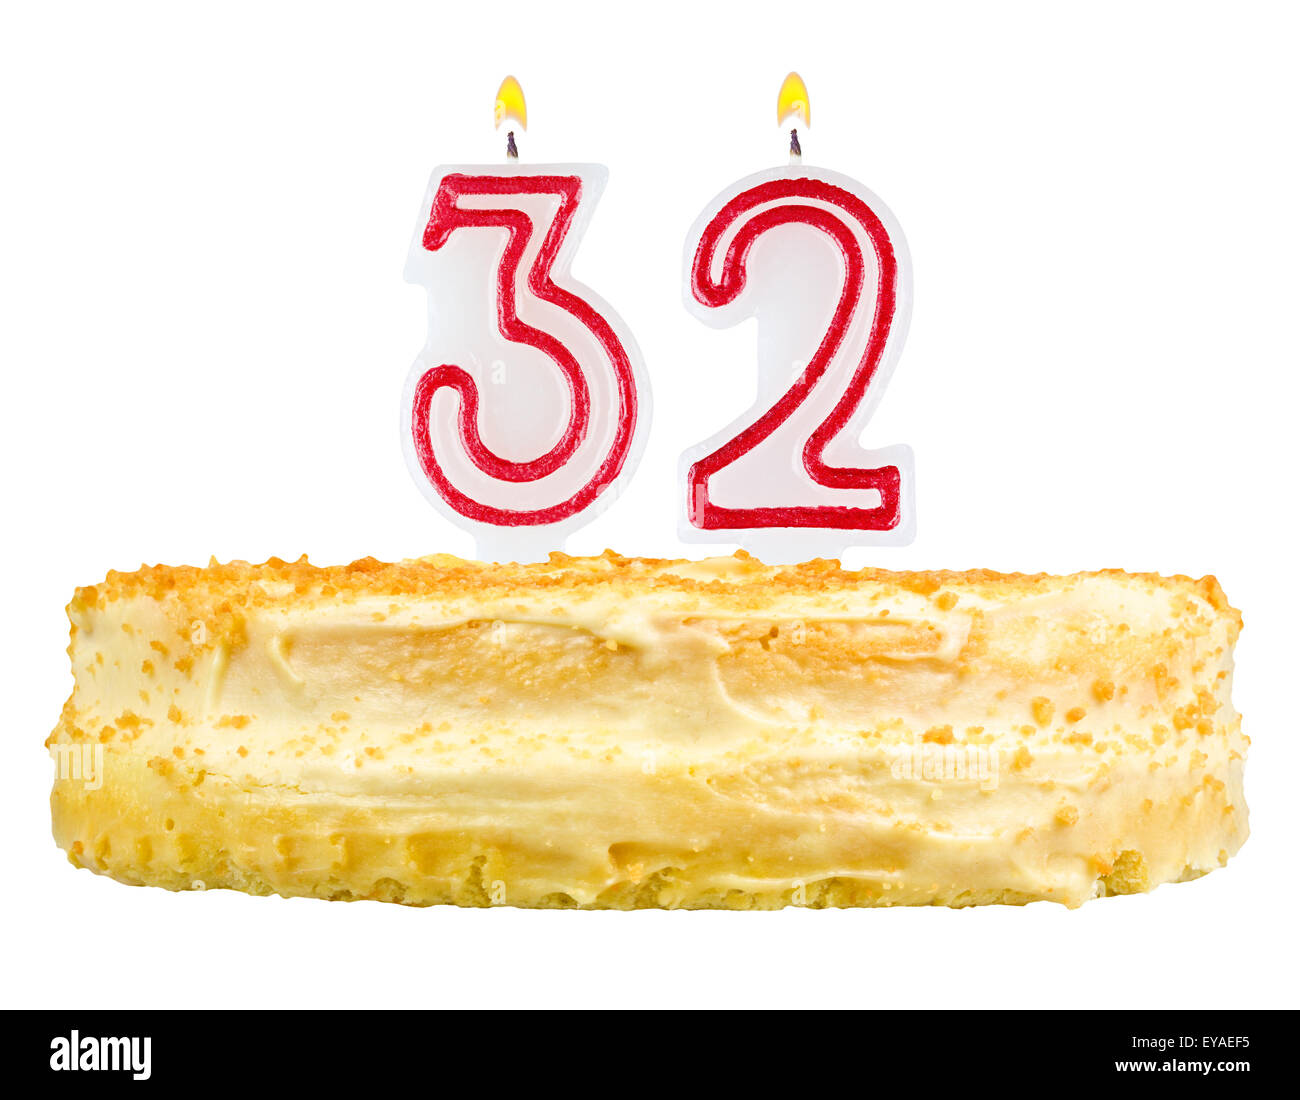 birthday cake with candles number thirty two isolated on white background Stock Photo